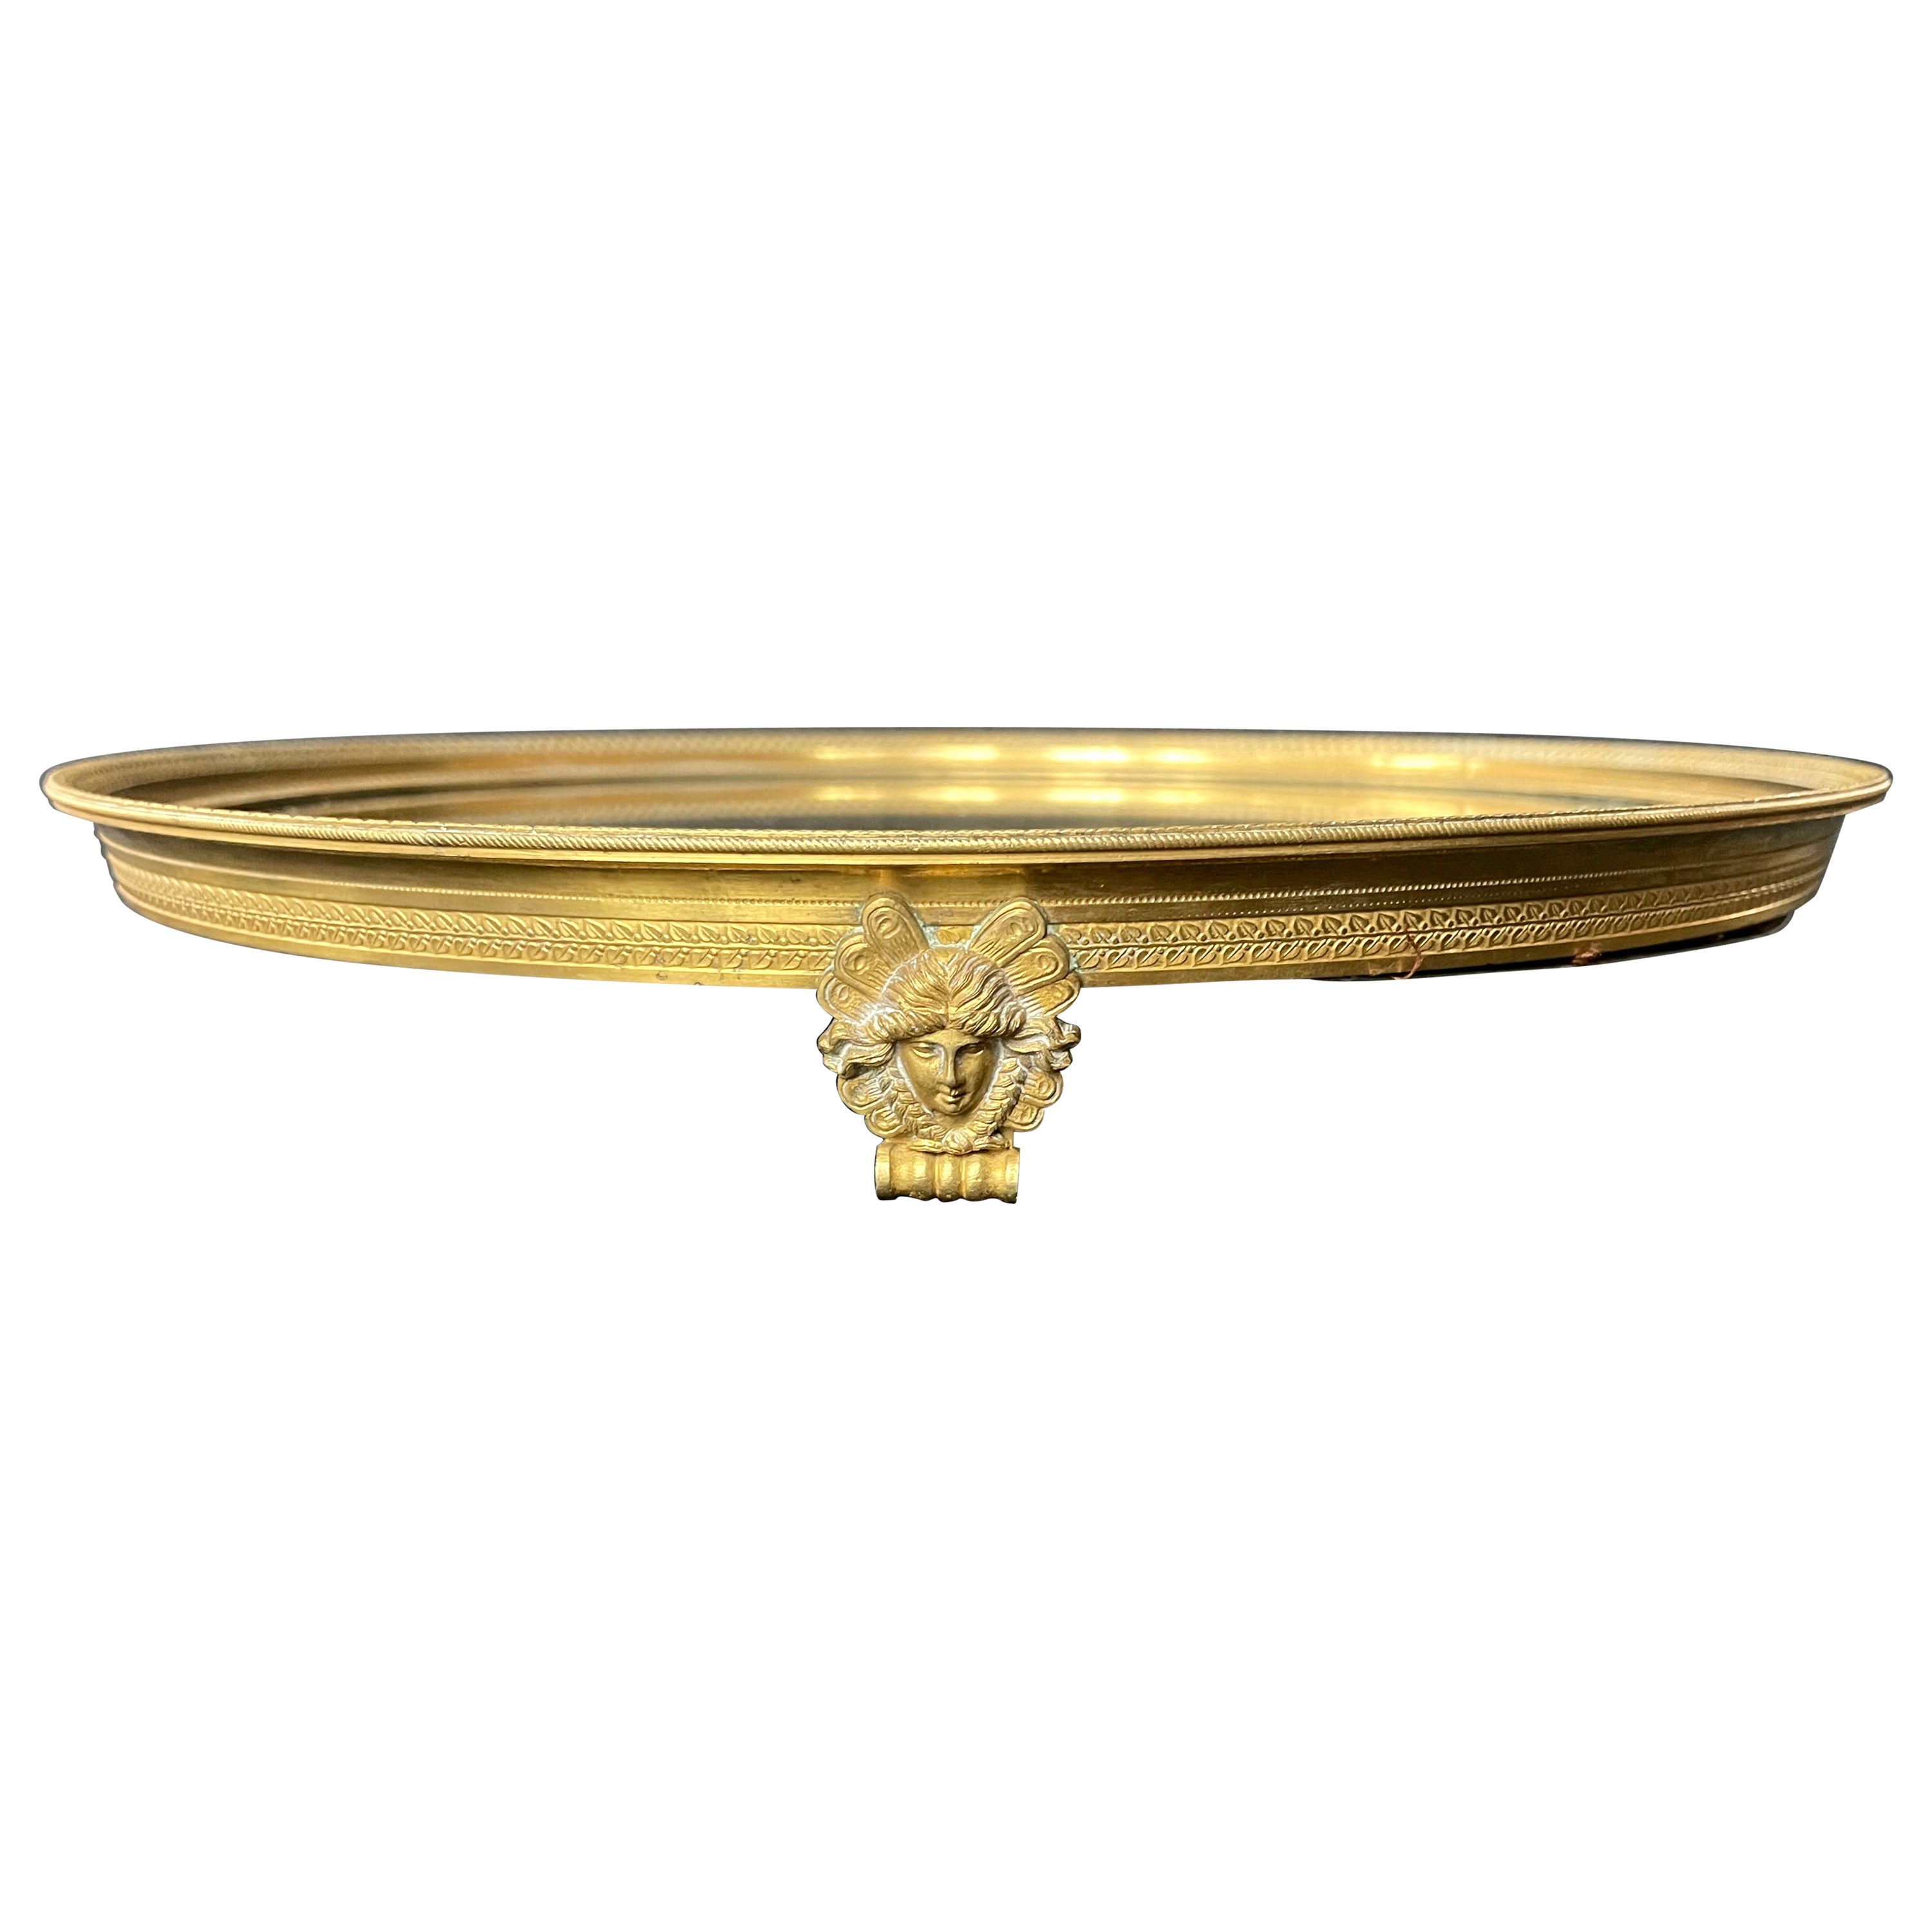 French Neoclassical Gilt Ormolu Mirrored Centerpiece For Sale